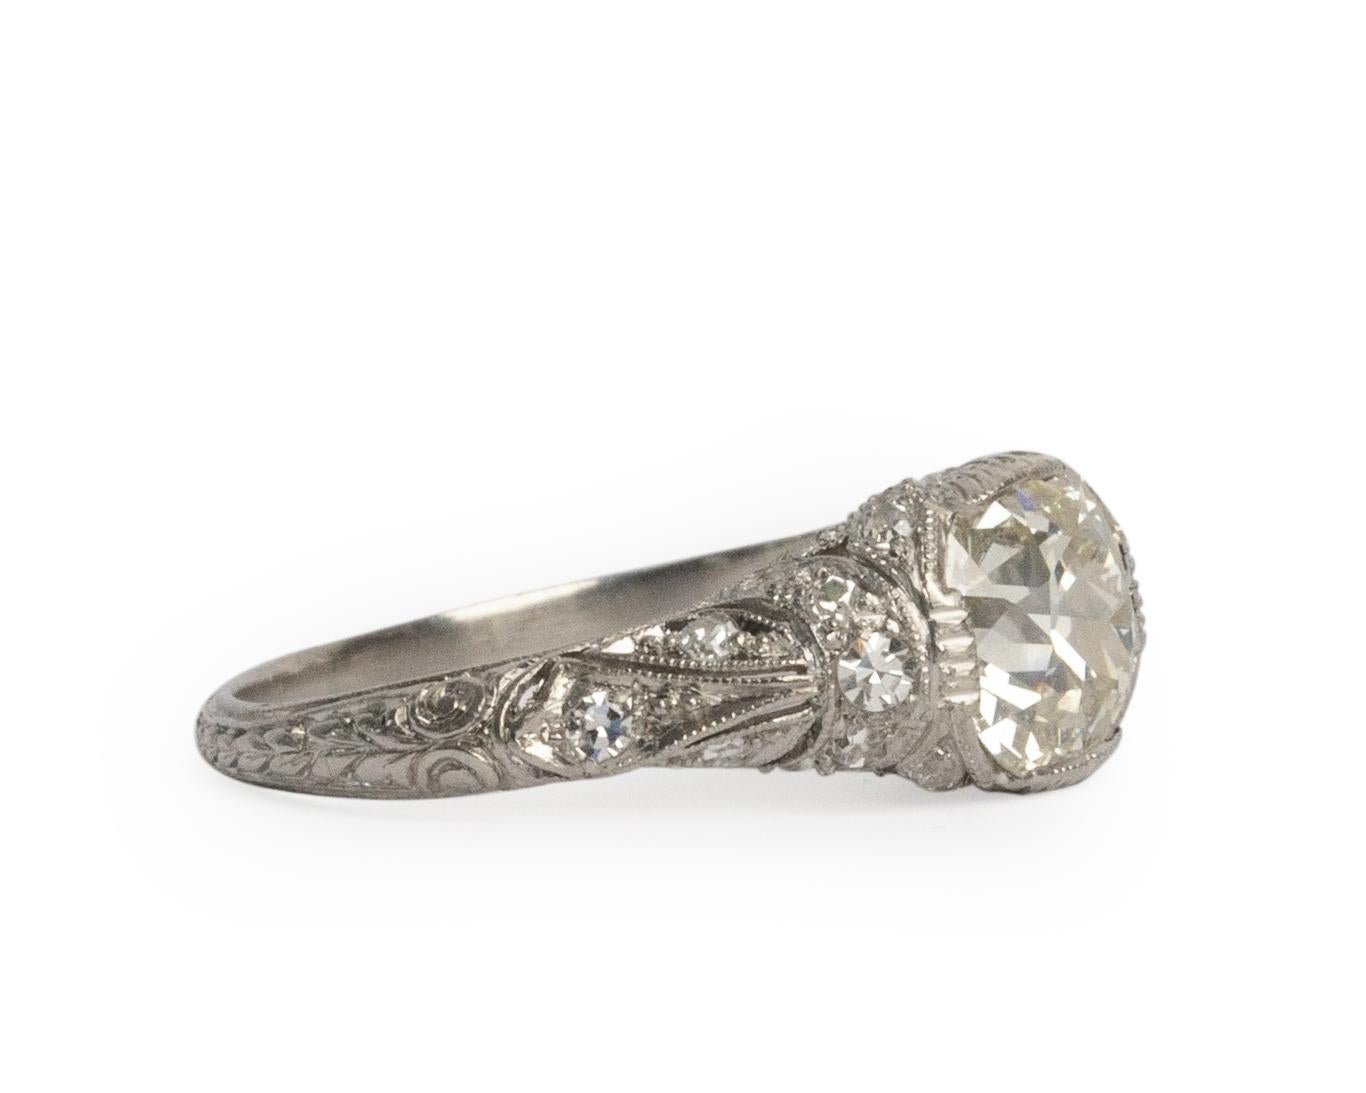 Ring Size: 7
Metal Type: Platinum  [Hallmarked, and Tested]
Weight:  3.5 grams

Center Diamond Details:
GIA REPORT #: 2211093523
Weight: 1.84
Cut: Old Mine - Antique Cushion
Color: M
Clarity: VS2

Side Diamond Details:
Weight: .25 carat, total